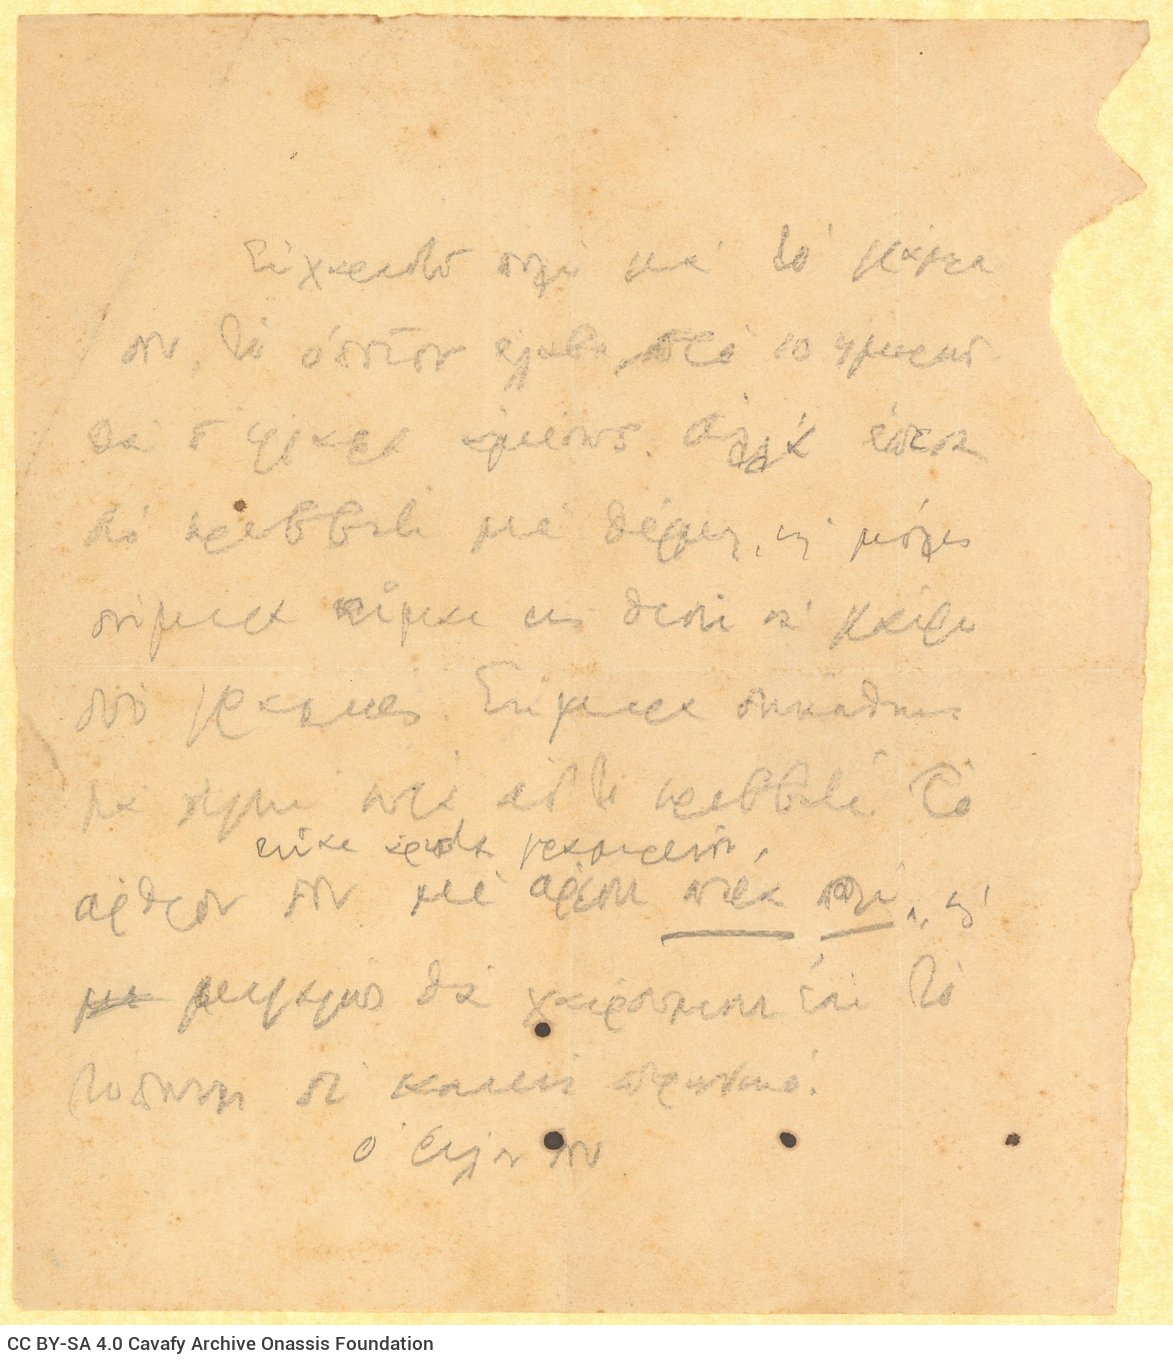 Handwritten draft letter to an unknown recipient on one side of a sheet. The poet refers to his poor health as well as to an 